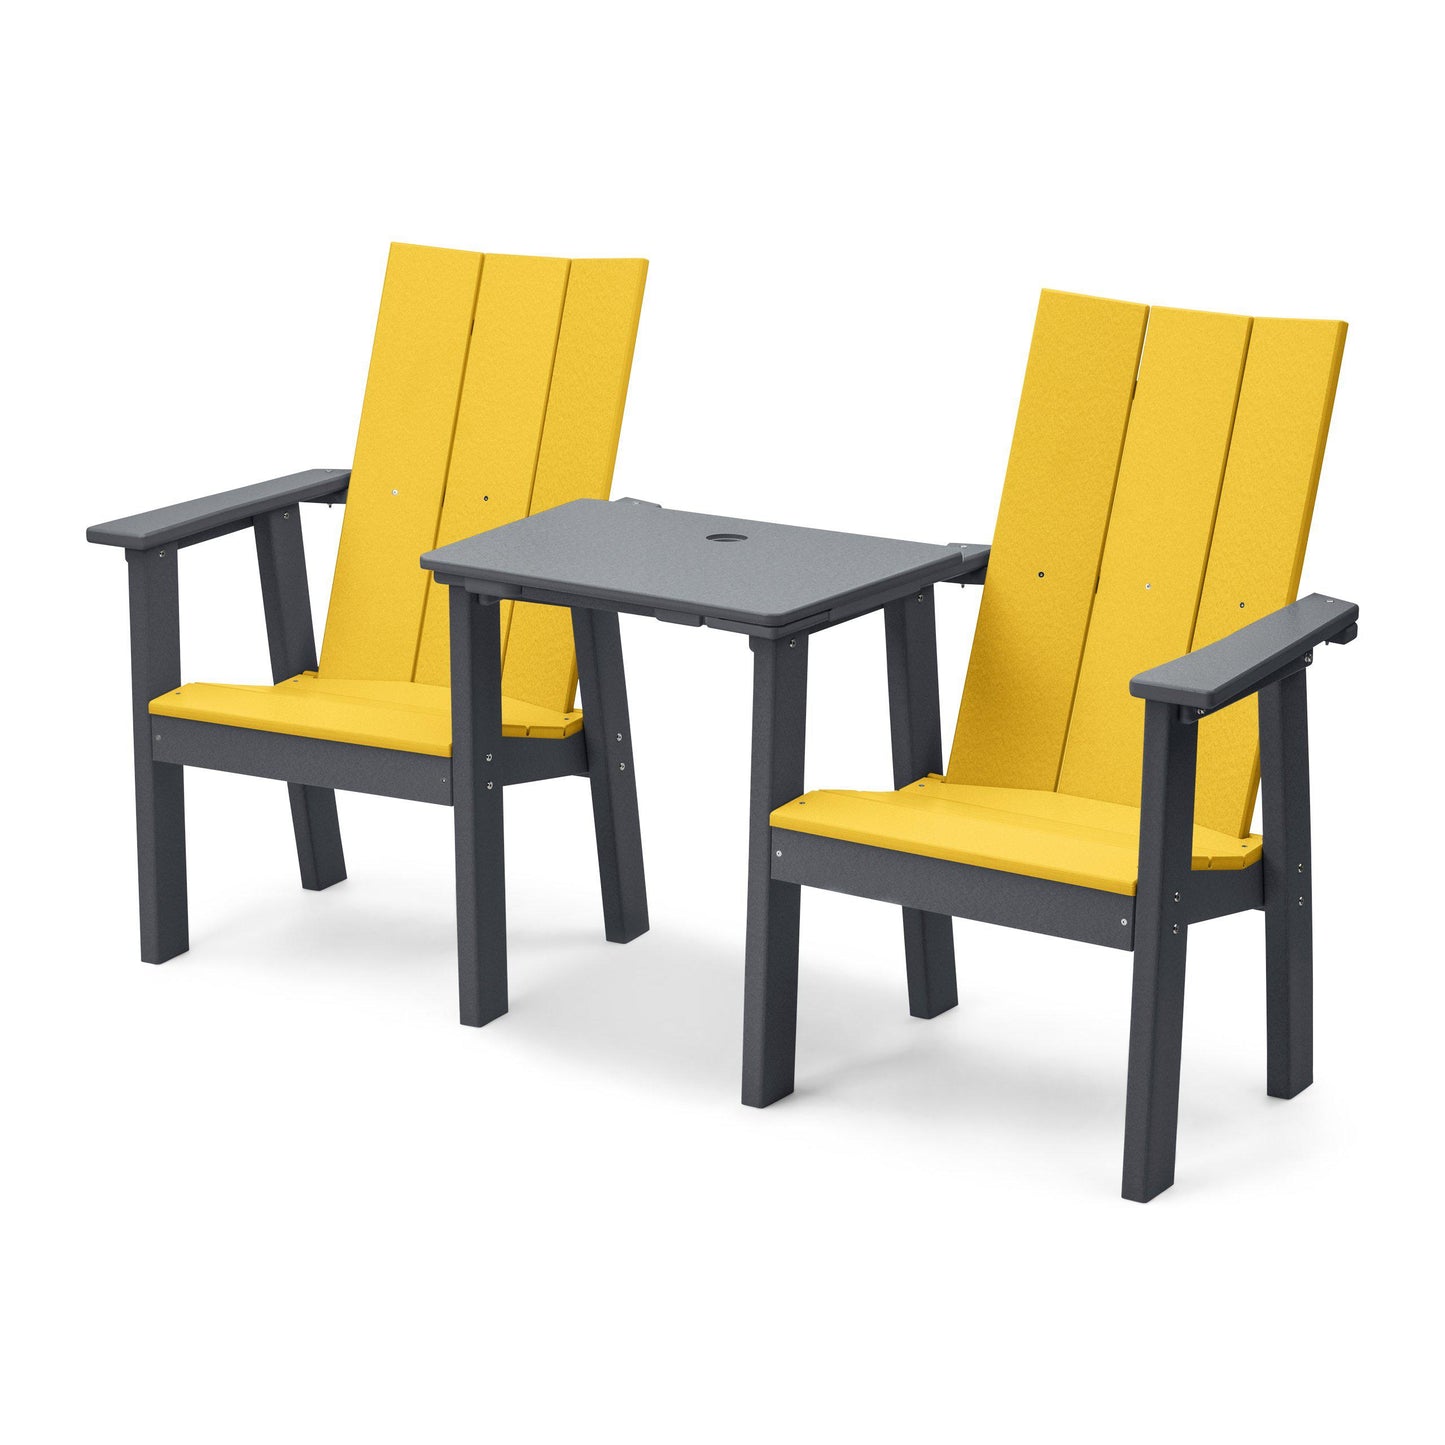 Perfect Choice Recycled Plastic Stanton Upright Adirondack Tete-A-Tete Chair Set - LEAD TIME TO SHIP 4 TO 9 WEEKS DEPENDING ON COLOR SELECTION